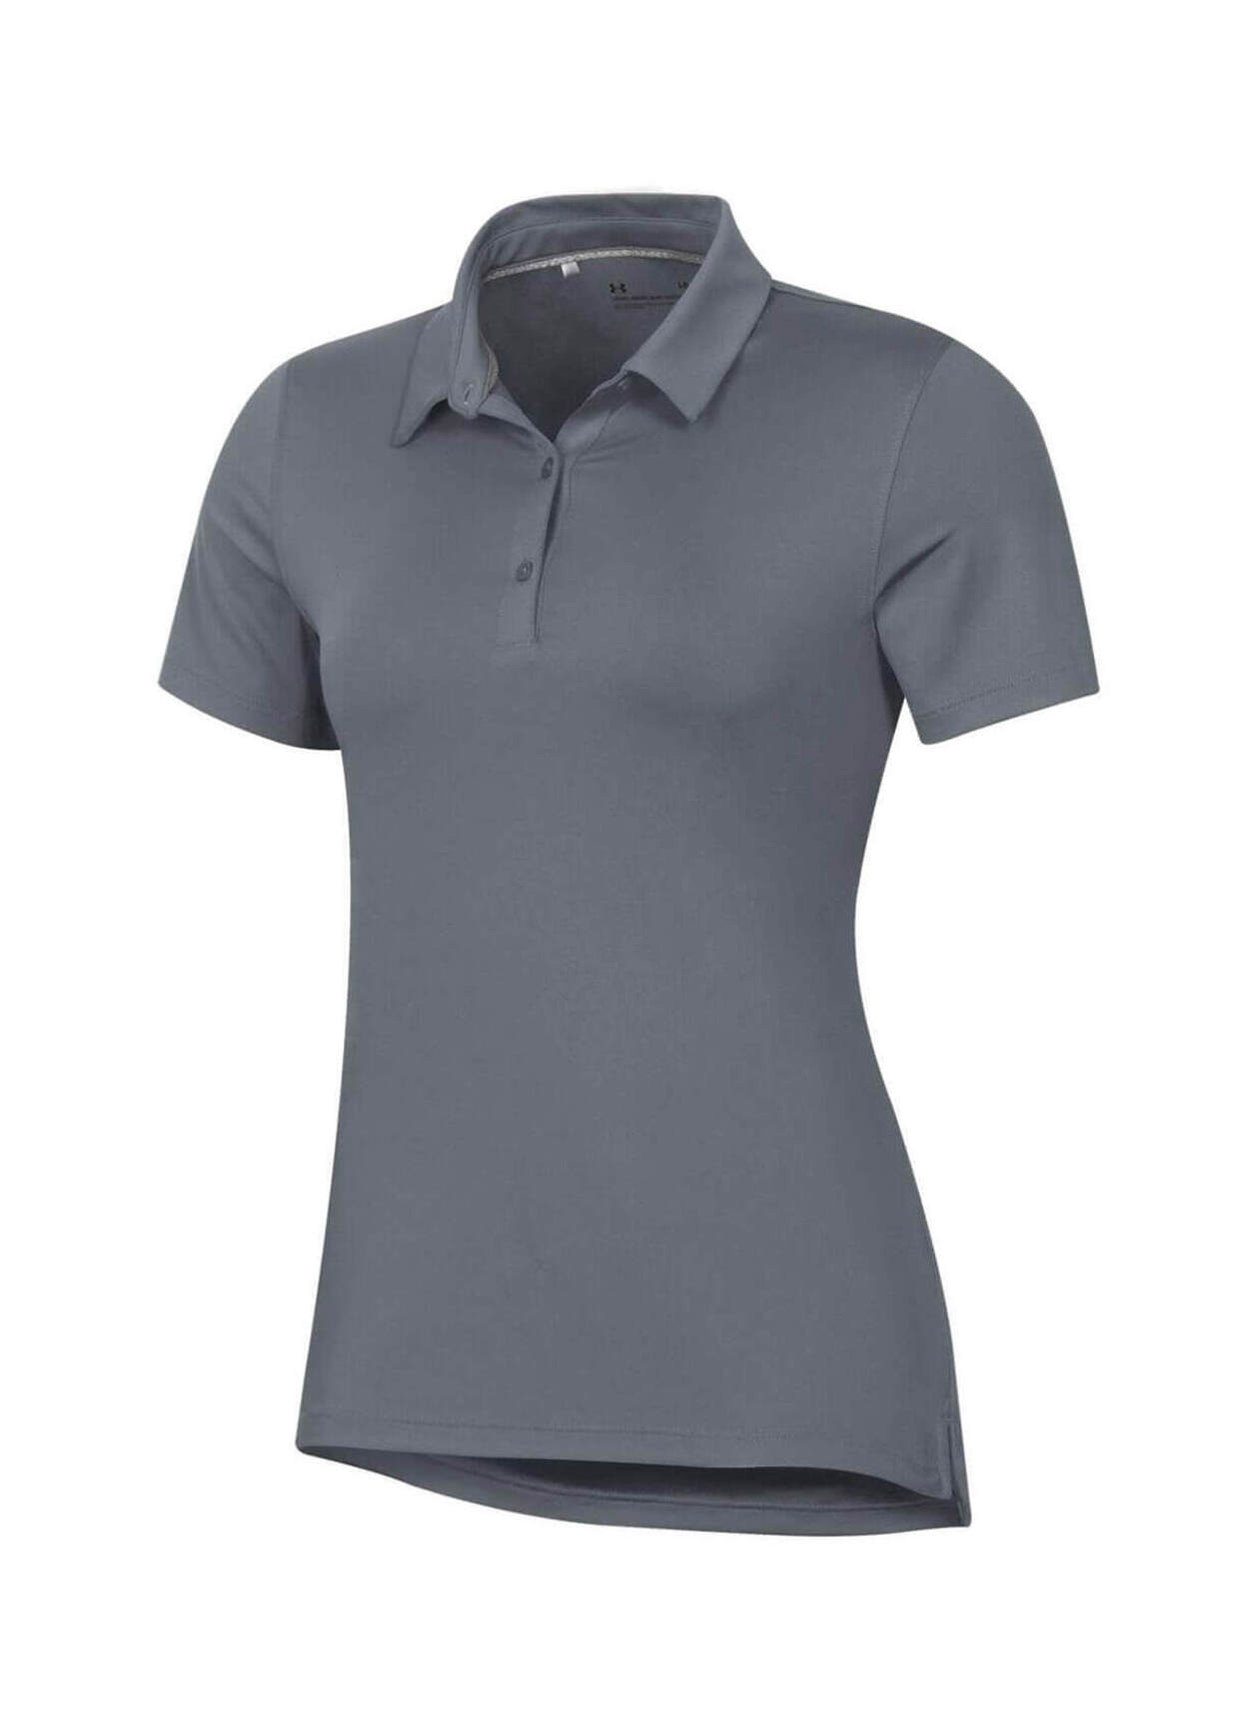 Under Armour Women's Pitch Grey T2 Green Polo